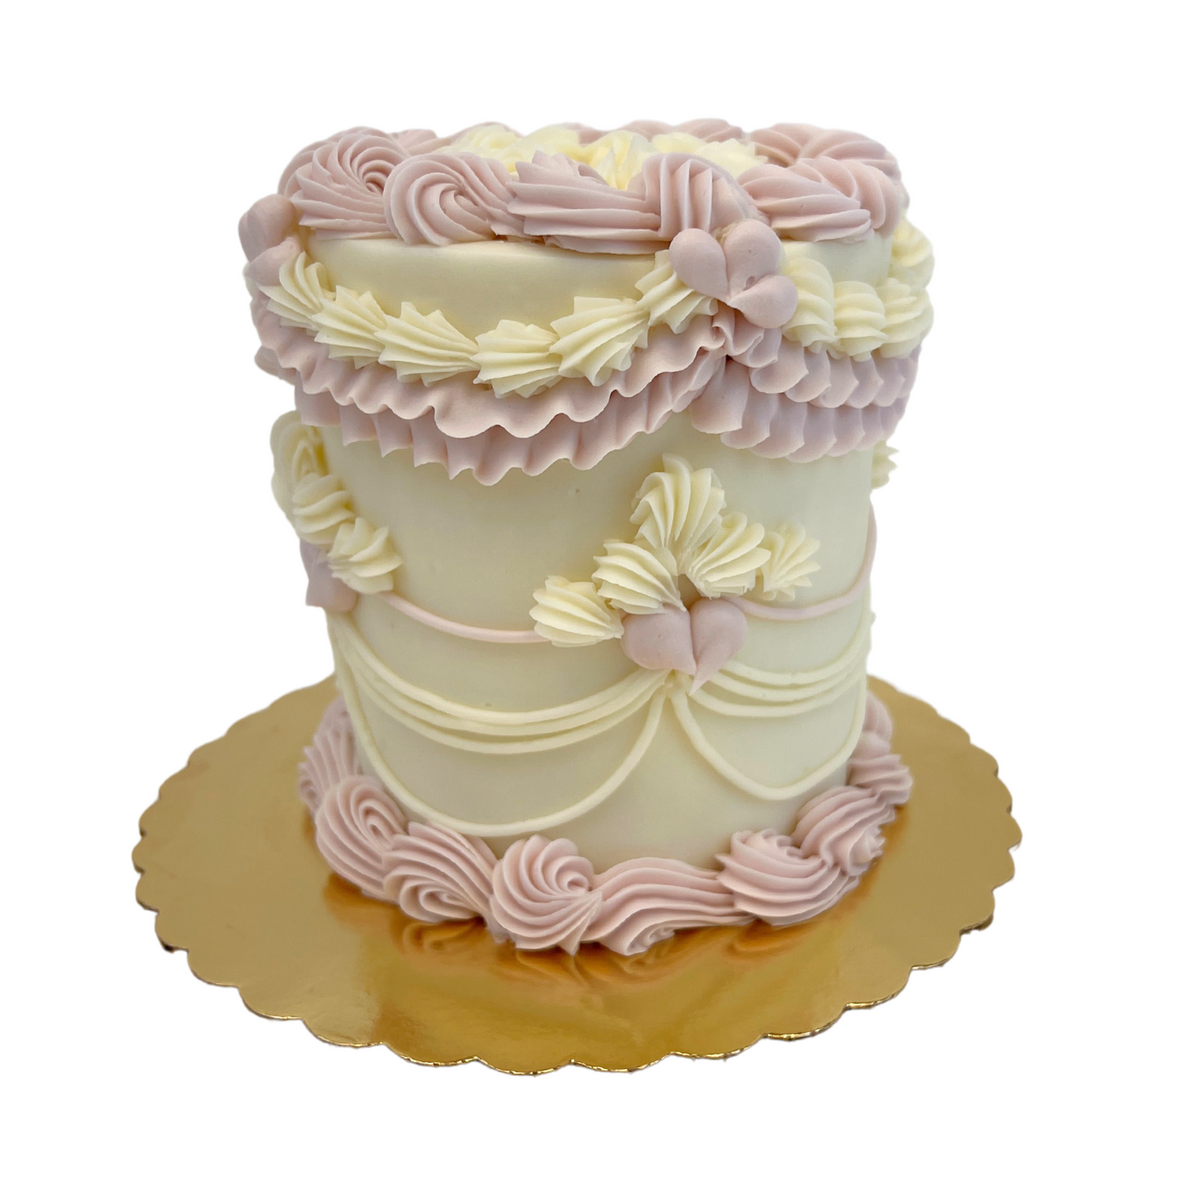 Vintage Piped Round Cake